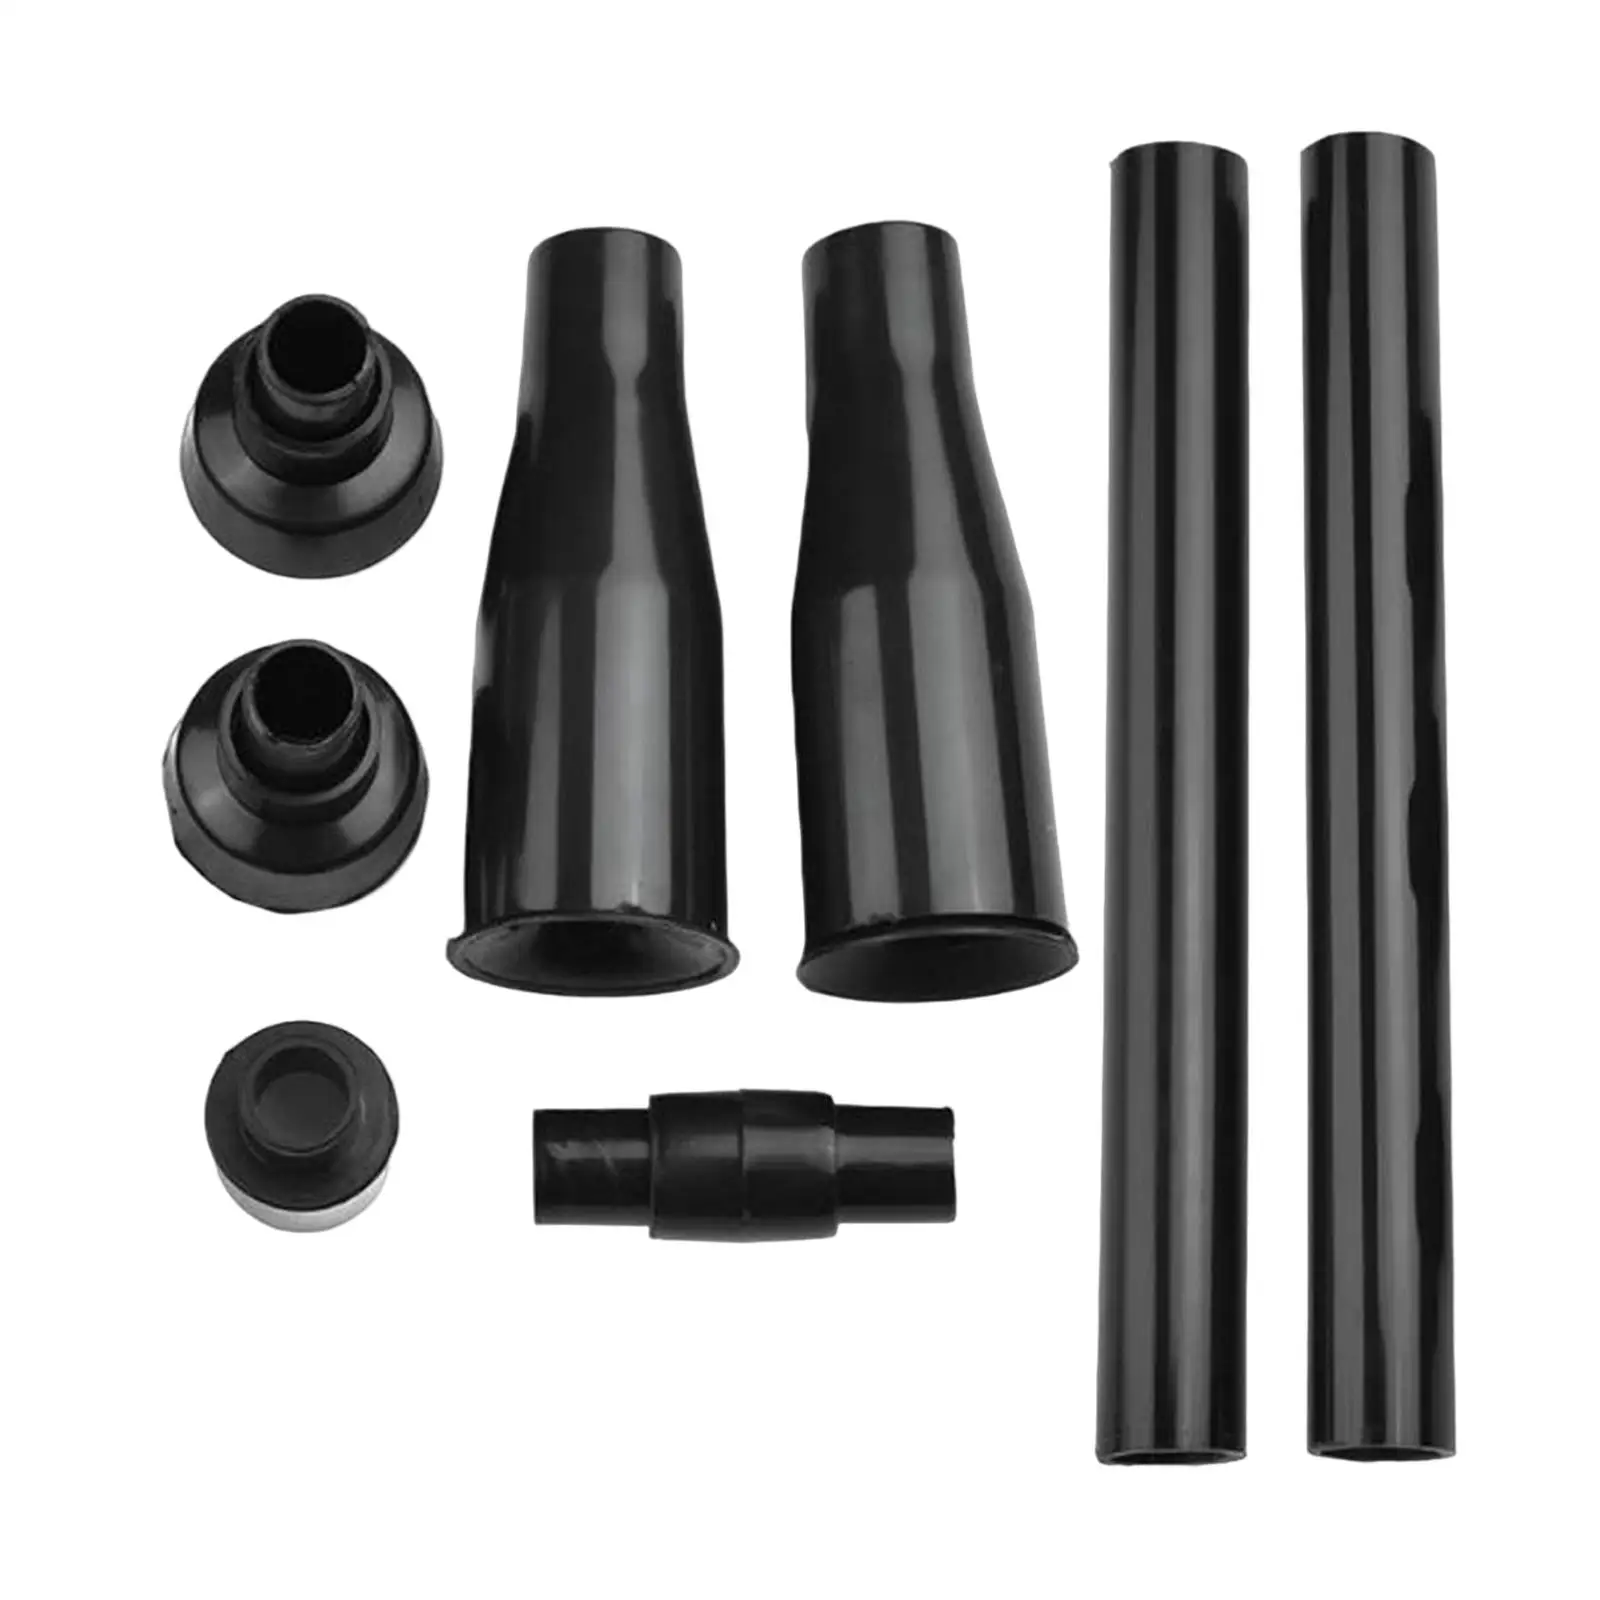 8Pcs Fountain Pump Nozzle Pool Sprayer Fountain Nozzle Replace Accessories Water Pump Parts for Garden Pool Waterfall Fountain